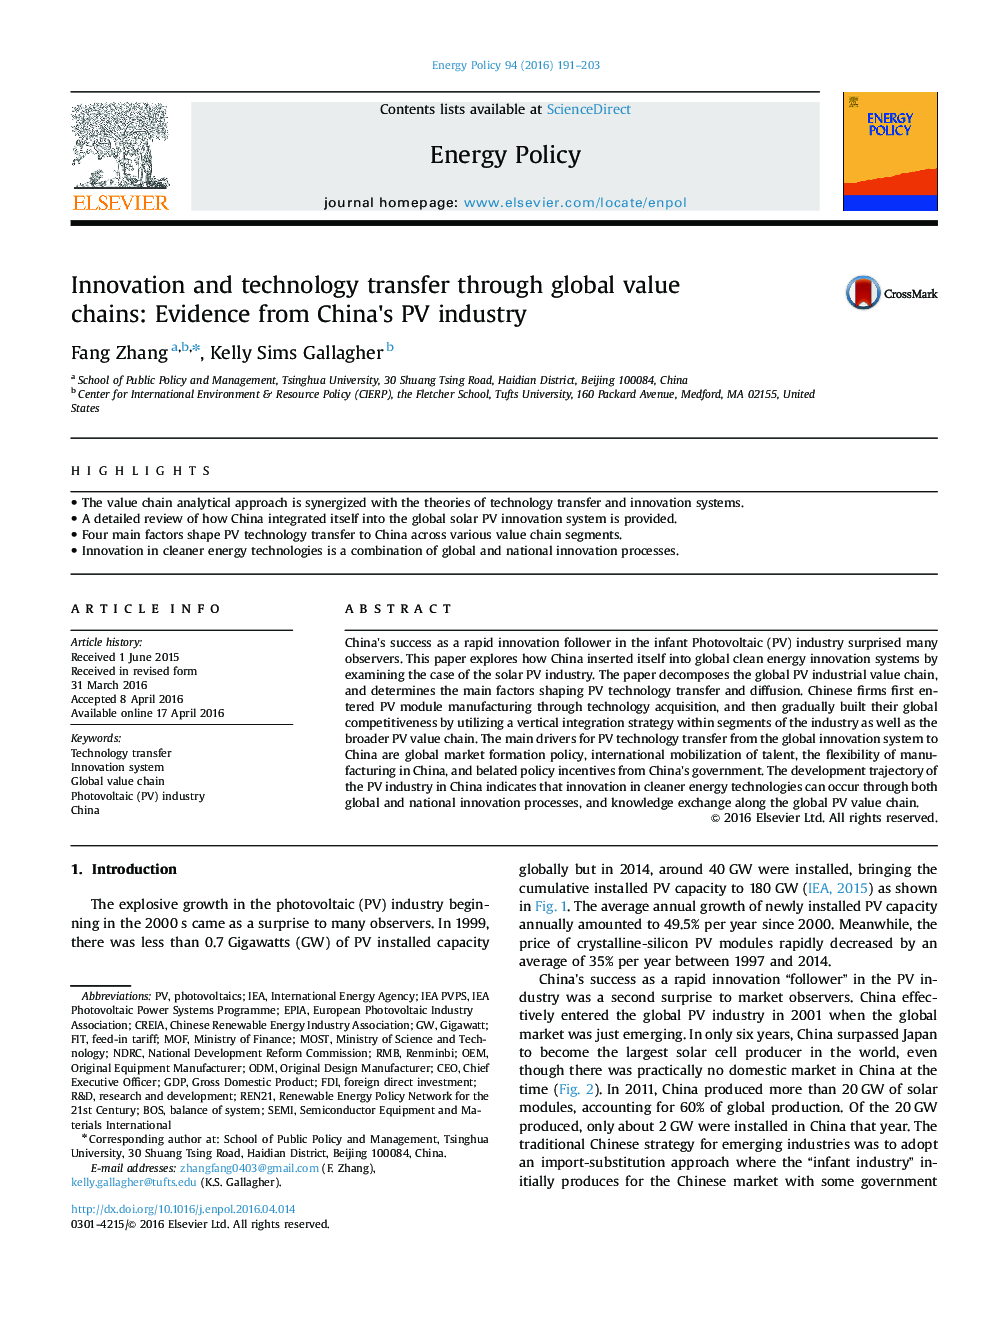 Innovation and technology transfer through global value chains: Evidence from China's PV industry